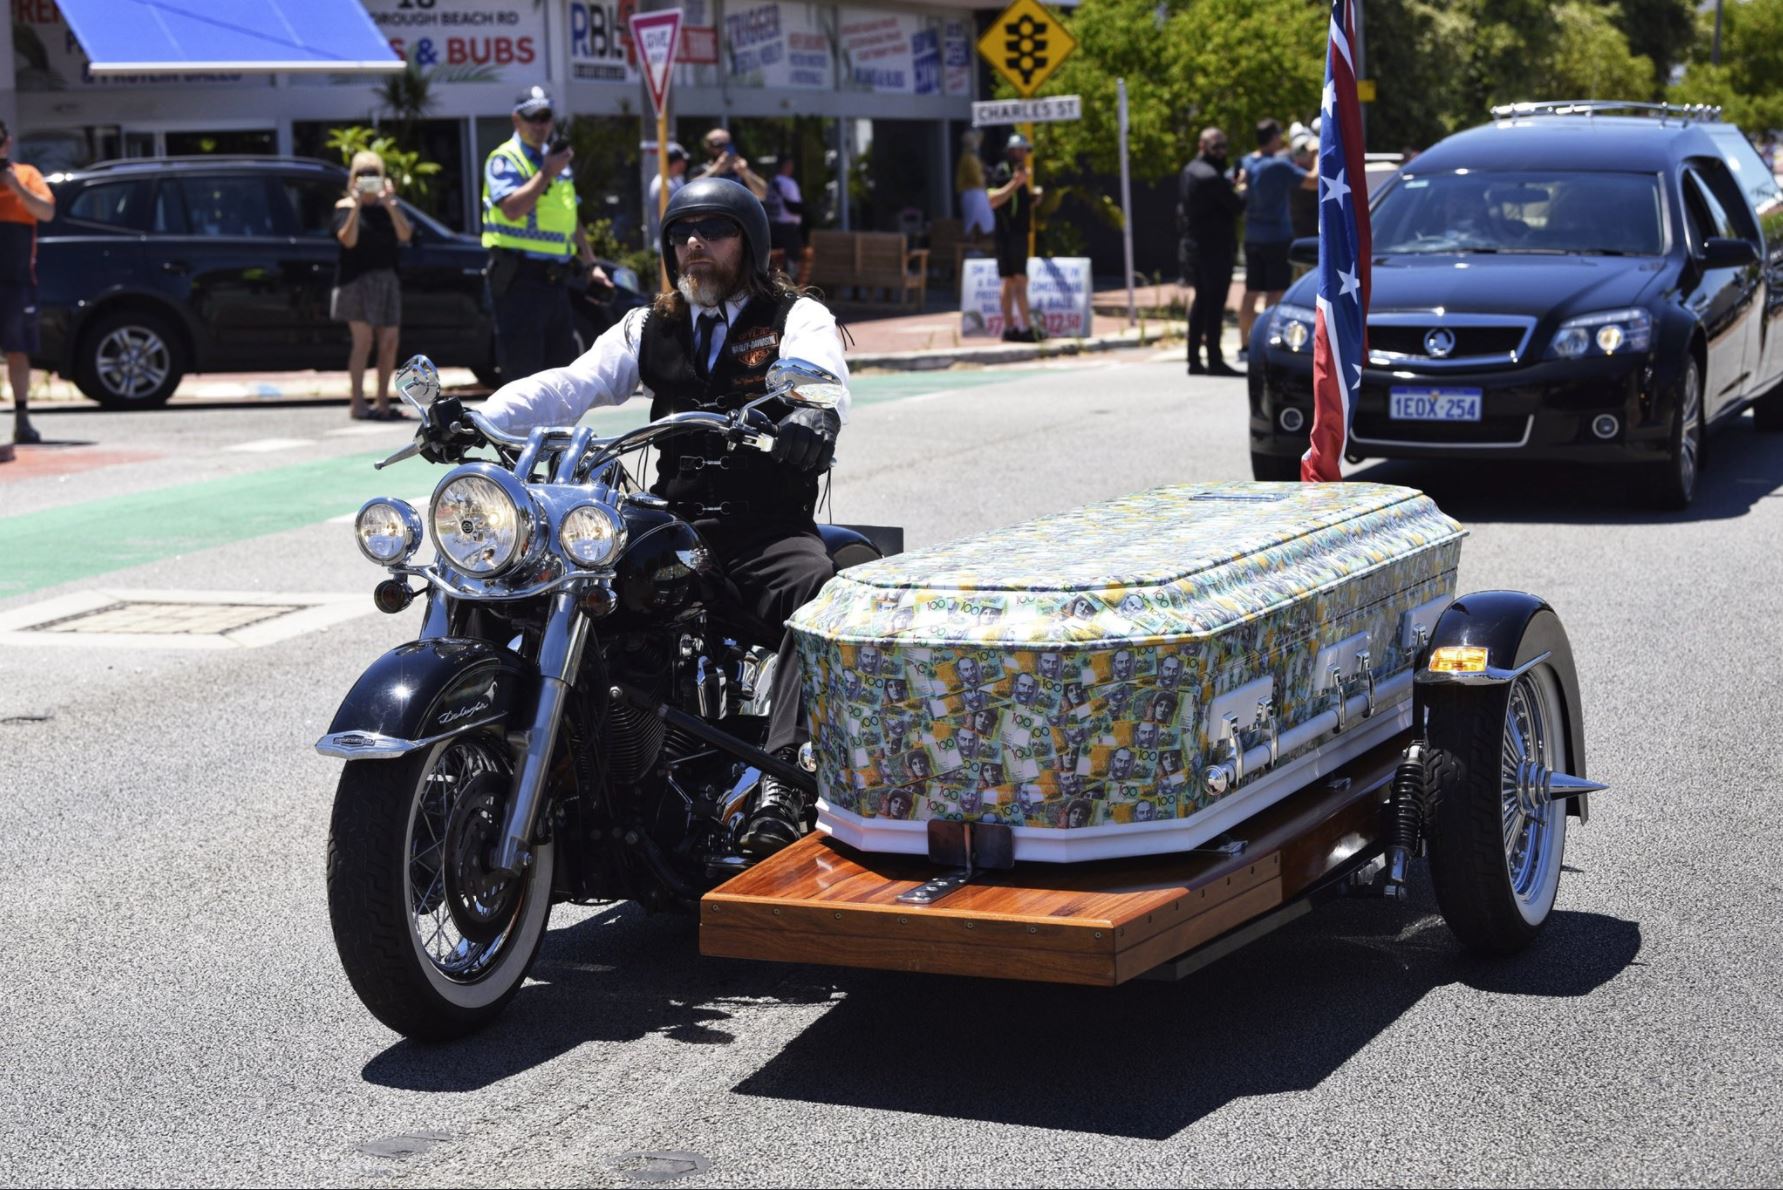 Article image for How to watch the funeral of slain Rebels bikie boss Nick Martin